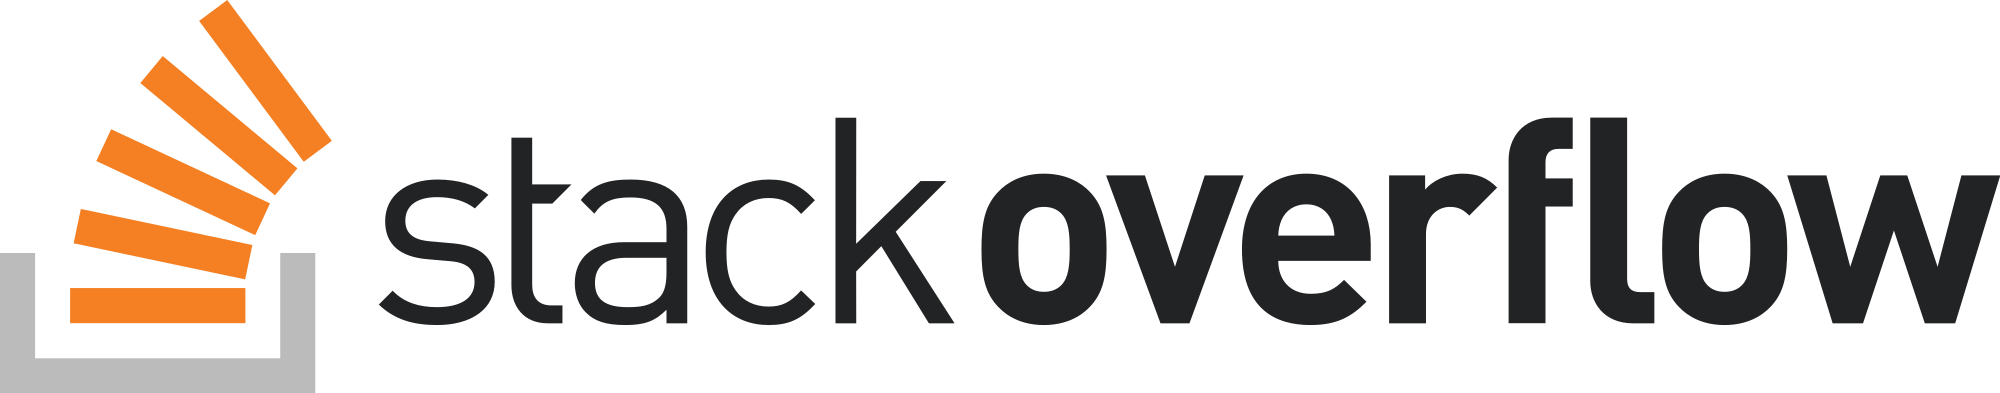 Stack Overflow Logo - File:Stack Overflow logo.svg - Wikimedia Commons